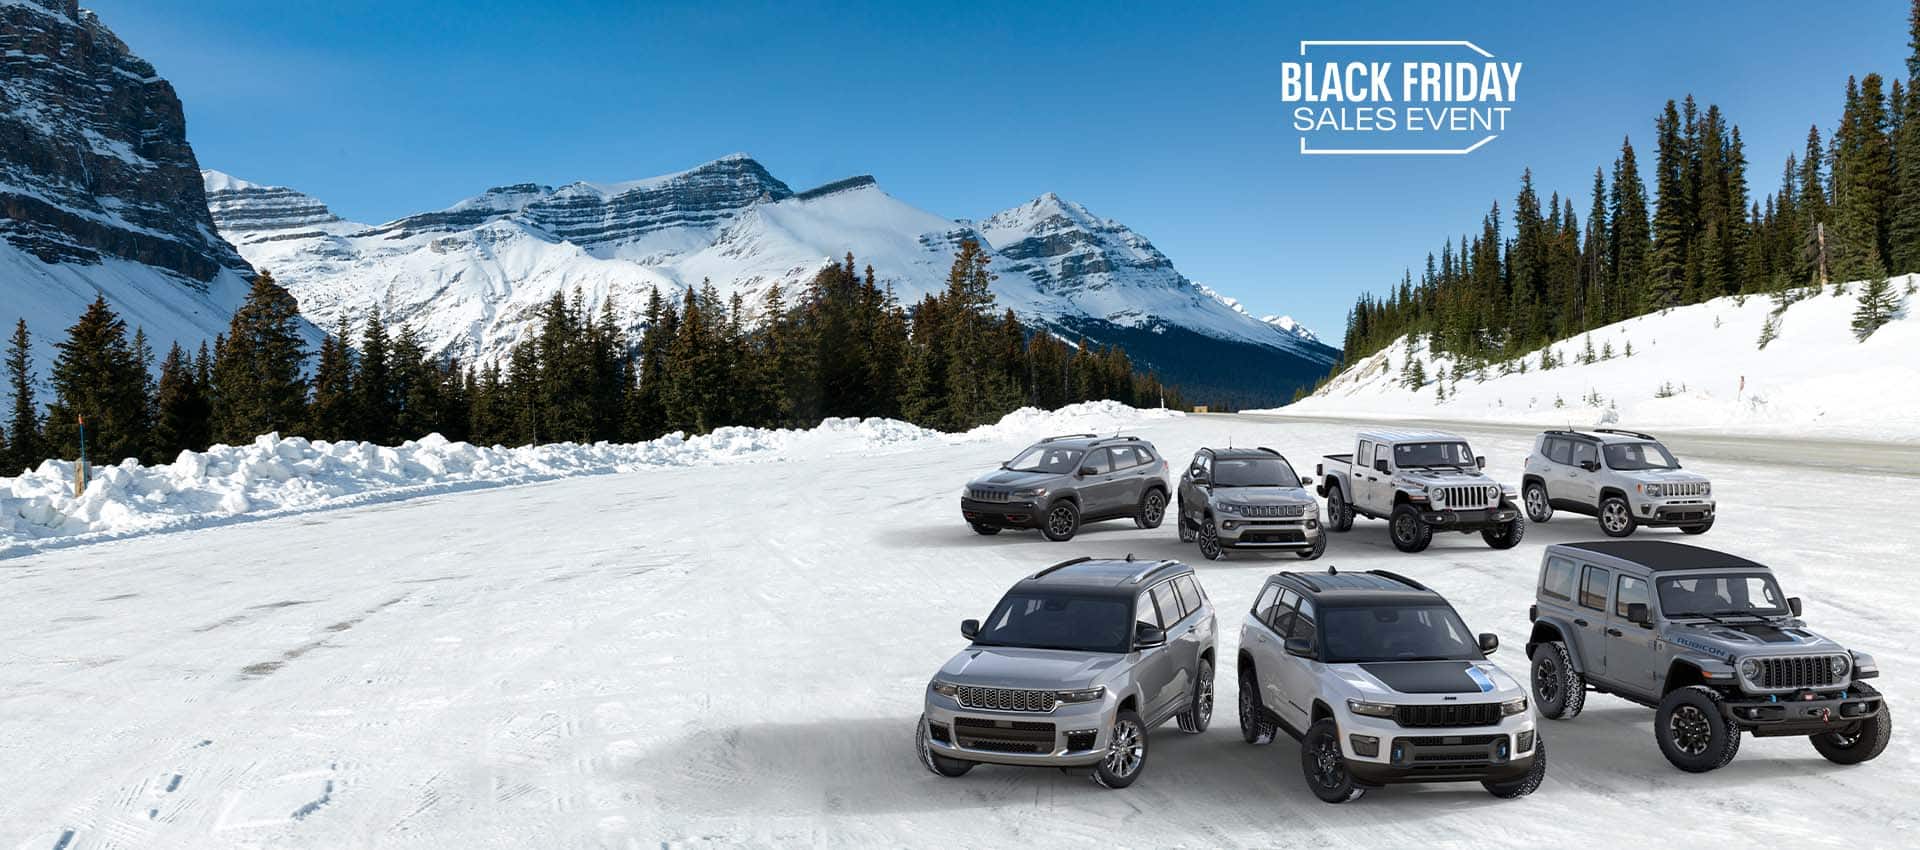 A lineup of a Series 3 and a Series 2, and seven 2023 Jeep Brand vehicles parked in two rows, on a snow-covered plain with mountains rising in the distance. In the front row: a 2023 Grand Cherokee L Summit, a 2023 Grand Cherokee 4xe Trailhawk and a 2024 Wrangler 4xe Rubicon X. In the back row: a 2023 Cherokee Trailhawk, a 2023 Compass Limited, a 2023 Gladiator Rubicon and a 2023 Renegade Limited. The Black Friday Sales Event.